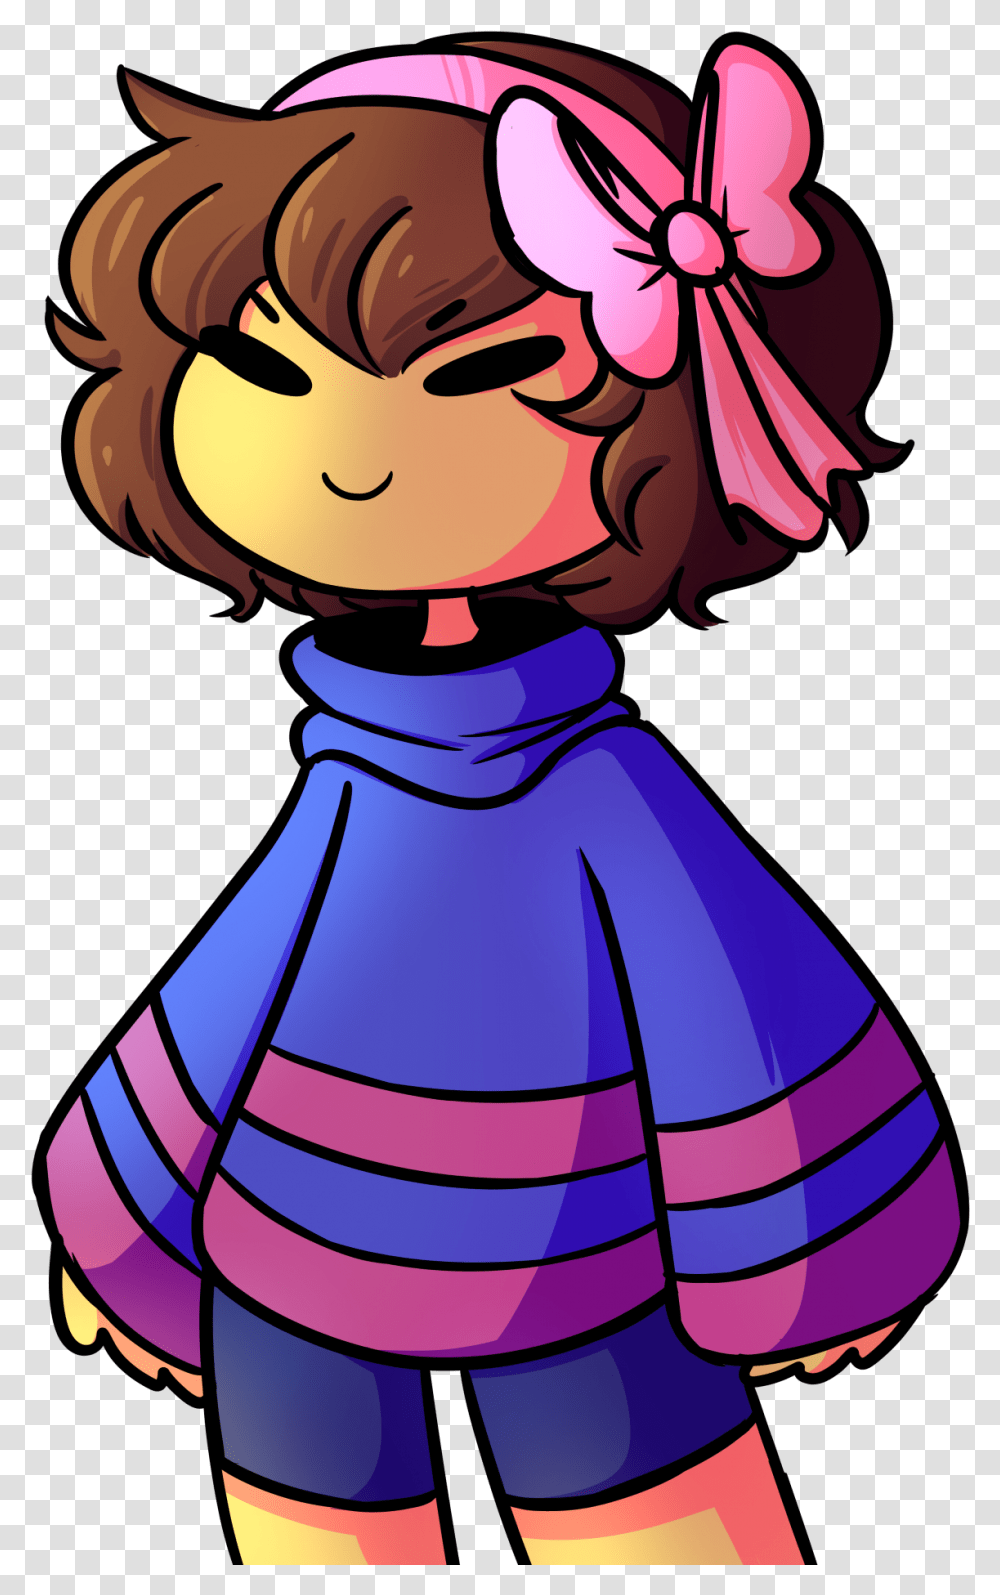 Undertale Hair Clothing Pink Purple Fictional Character Frisk Hair Color, Female, Accessories Transparent Png